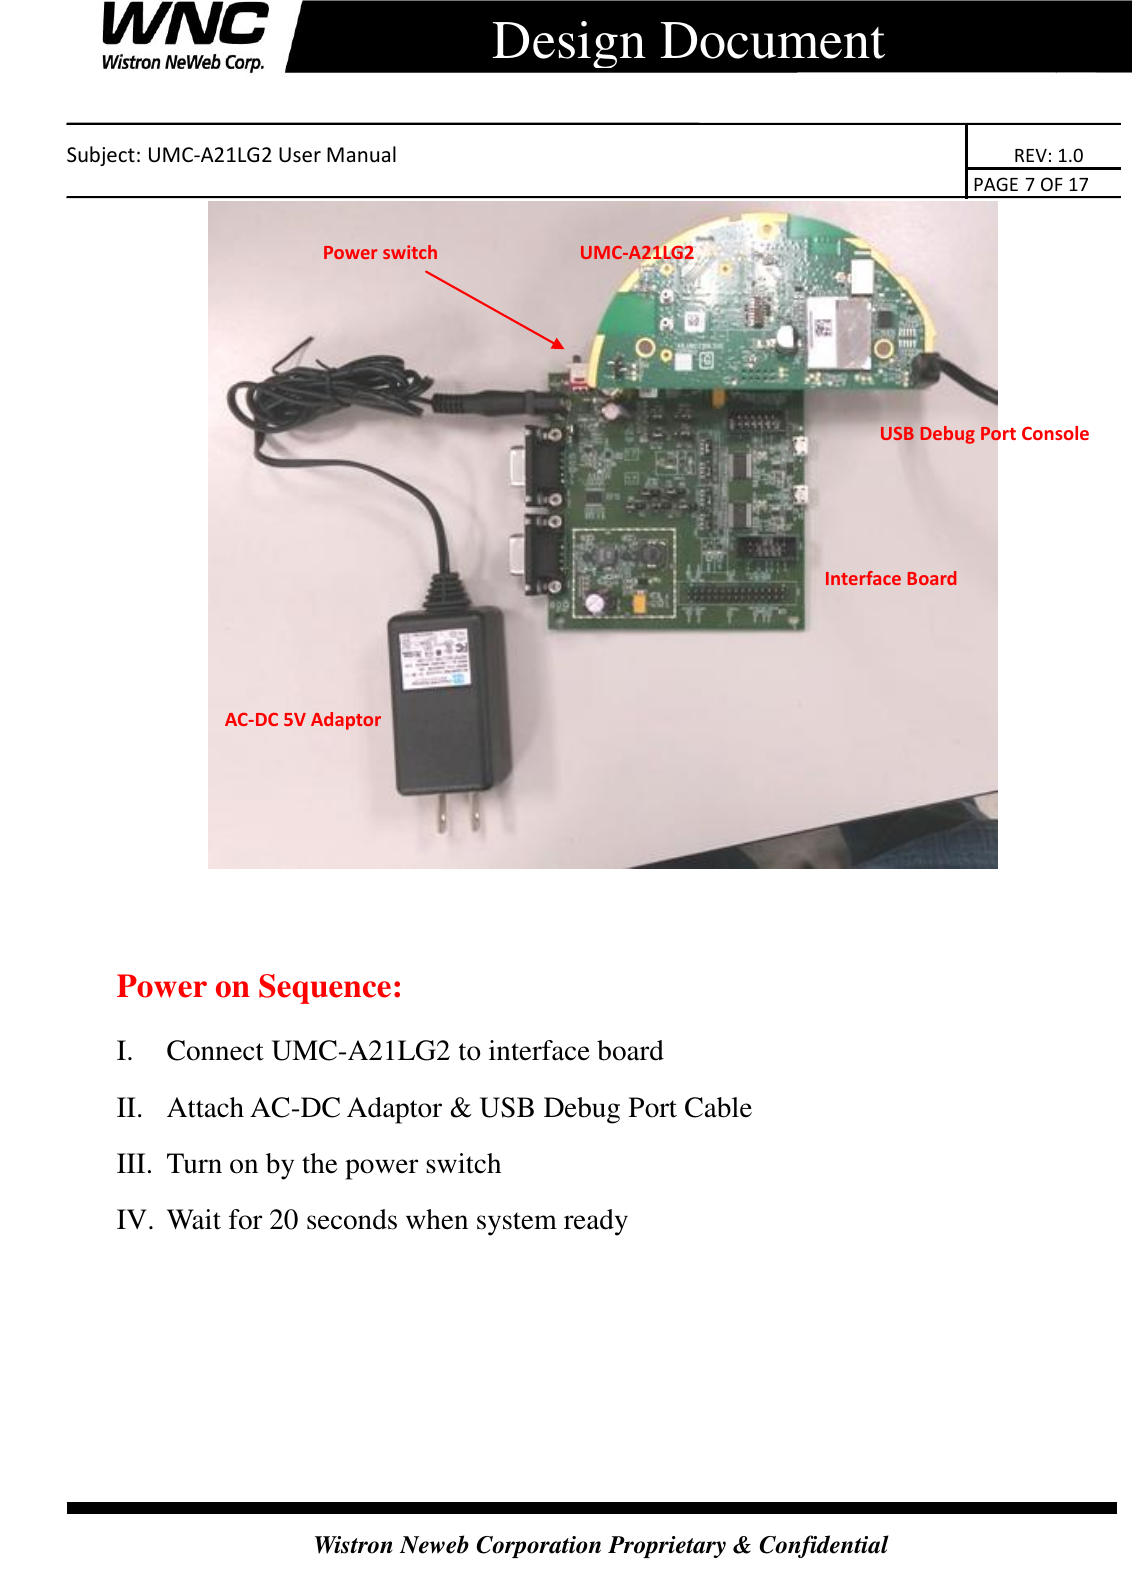    Subject: UMC-A21LG2 User Manual                                                                      REV: 1.0                                                                                        PAGE 7 OF 17  Wistron Neweb Corporation Proprietary &amp; Confidential      Design Document    Power on Sequence: I. Connect UMC-A21LG2 to interface board II. Attach AC-DC Adaptor &amp; USB Debug Port Cable III. Turn on by the power switch IV. Wait for 20 seconds when system ready AC-DC 5V Adaptor Interface Board   USB Debug Port Console Power switch UMC-A21LG2 SMCCSMCCSMCCB) 